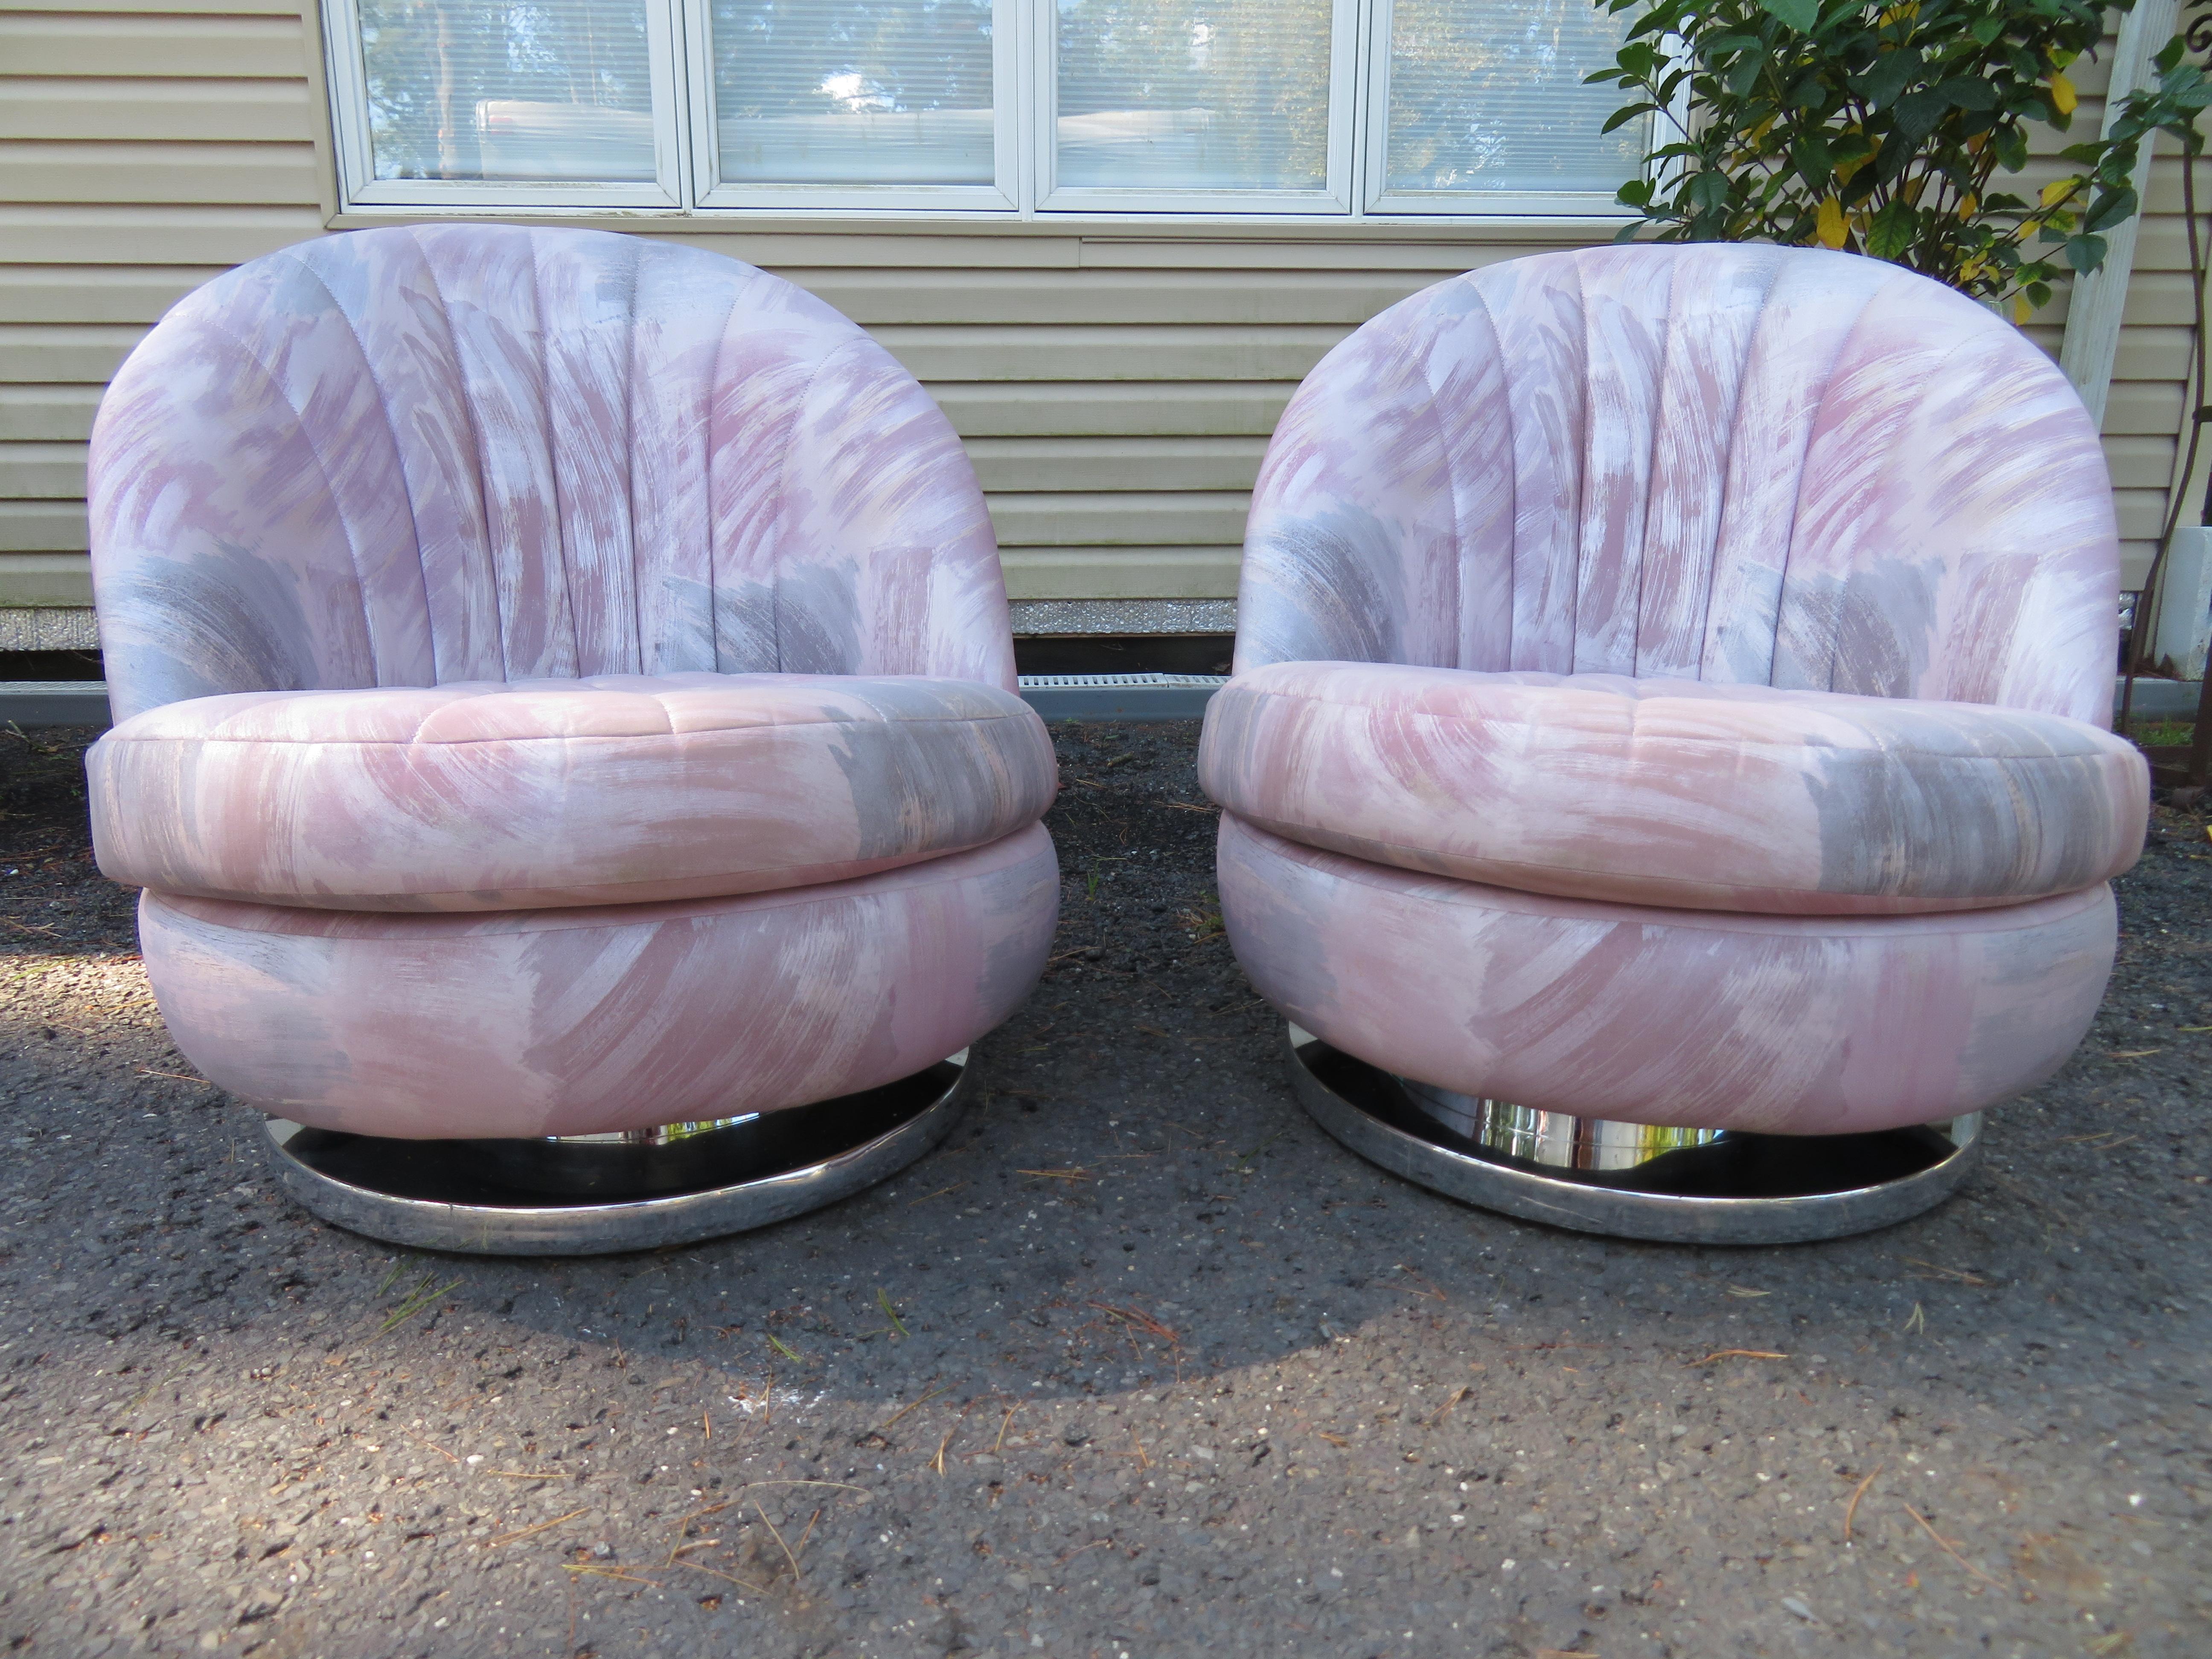 Magnificent pair of rocker swivel rounded back lounge chairs designed by Milo Baughman, made by Thayer Coggin. Very comfortable and fun to sit in with the swivel rocker action. Both chairs are in very good condition with few if any signs of wear.